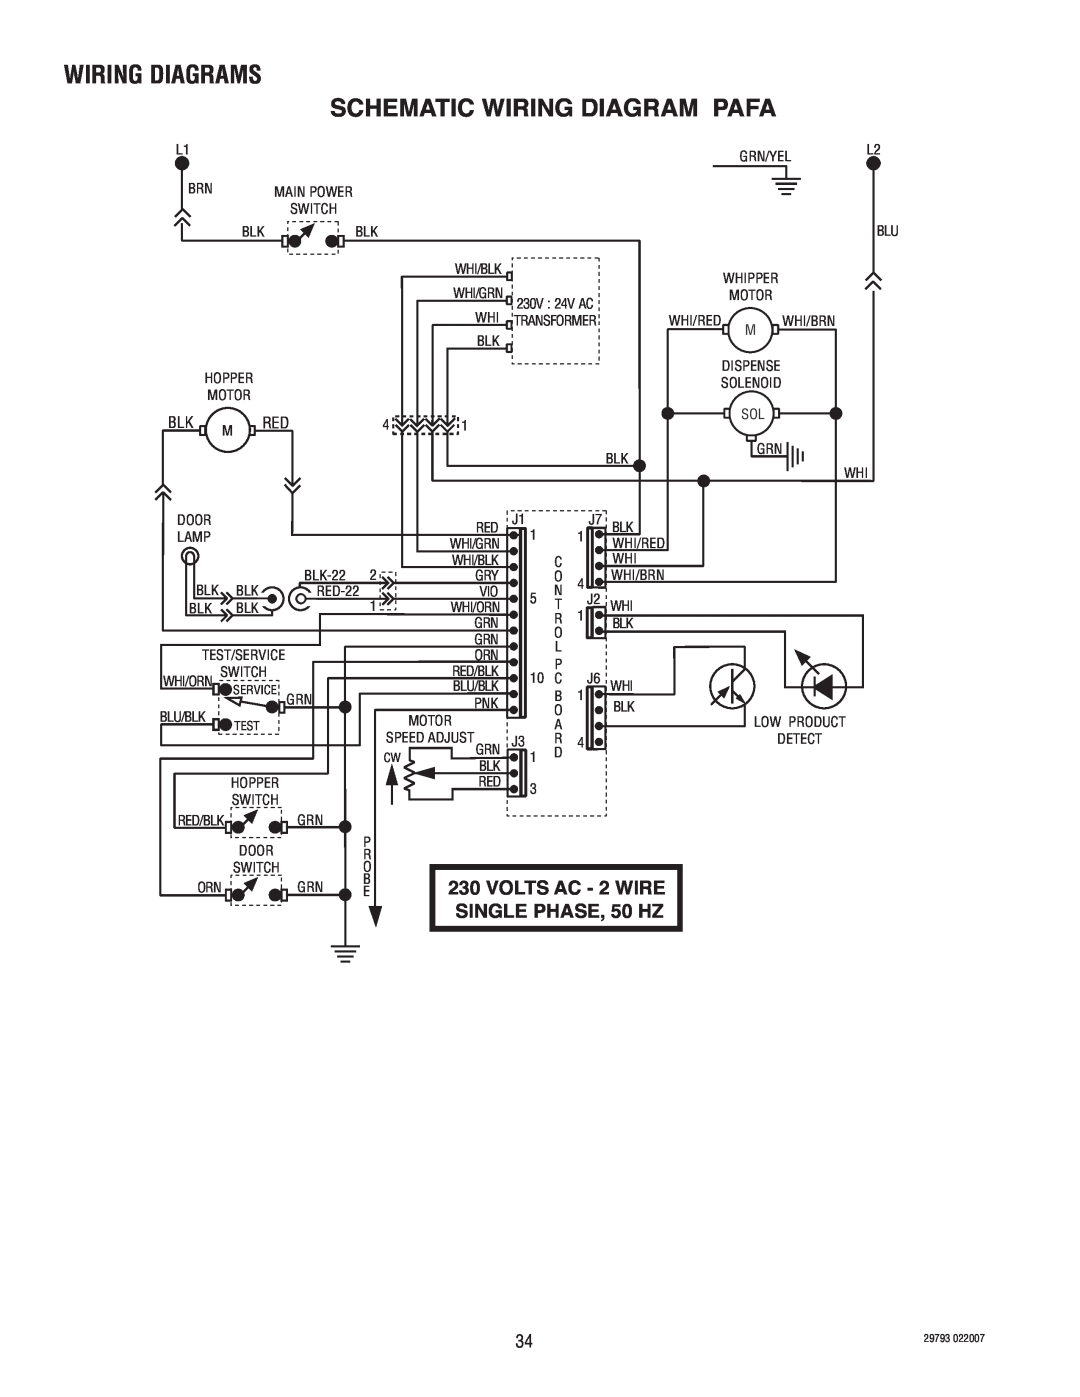 Bunn CDS-3 manual Wiring Diagrams Schematic Wiring Diagram Pafa, VOLTS AC - 2 WIRE, SINGLE PHASE, 50 HZ 